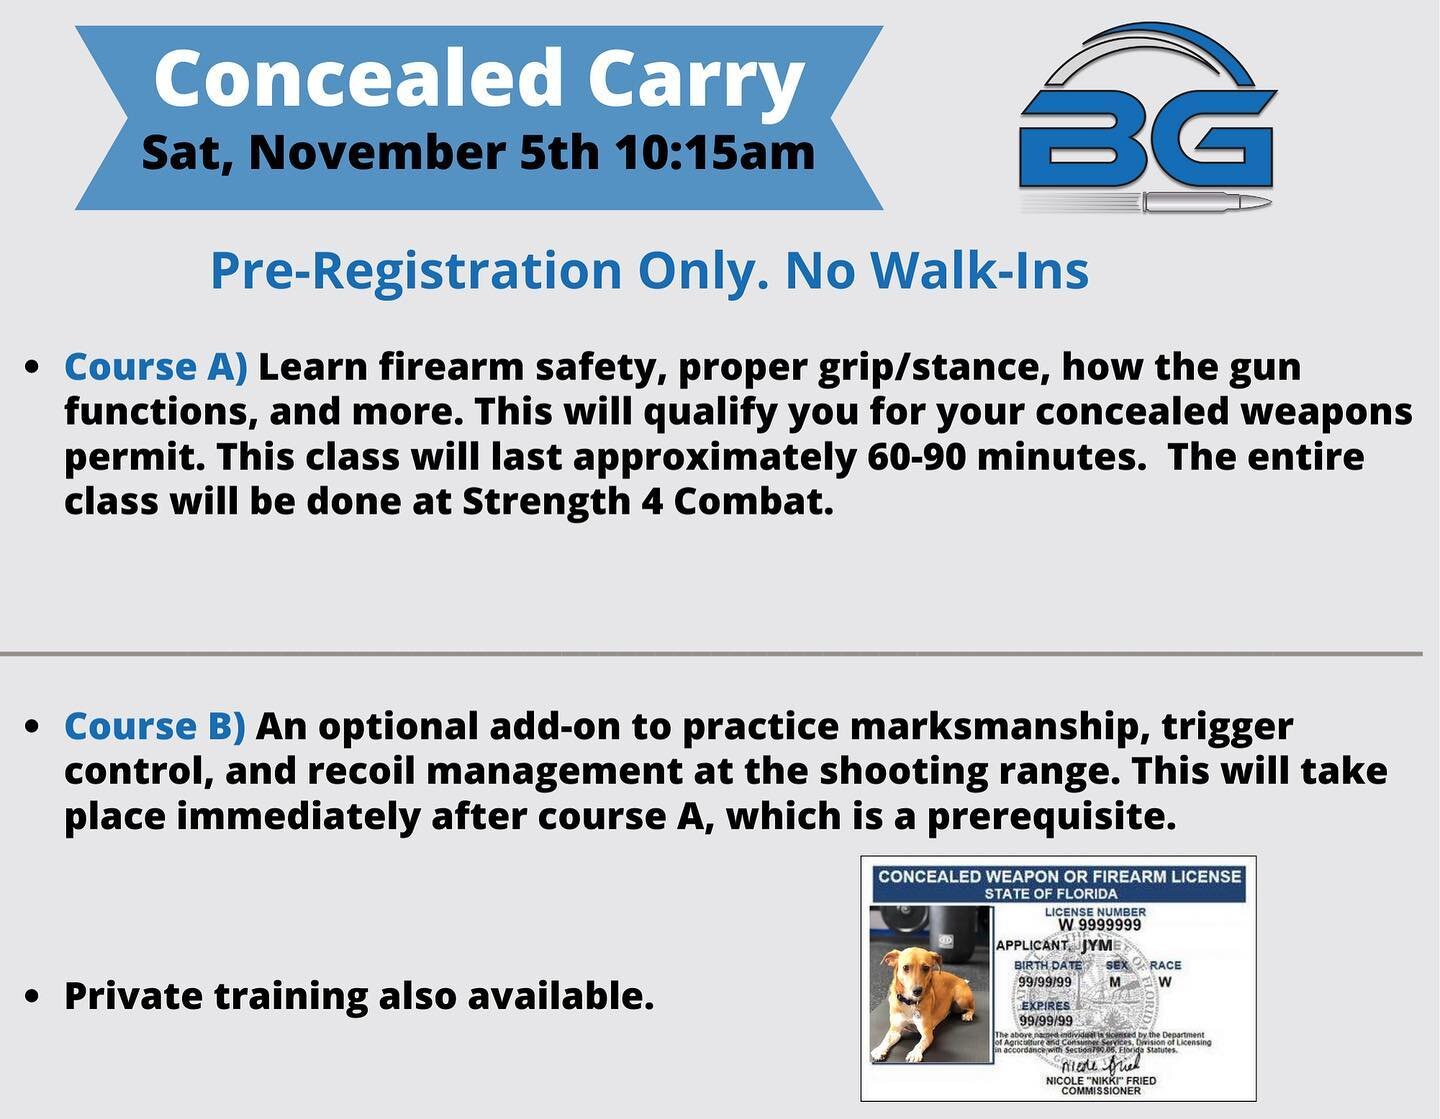 🔹Qualify For Your Concealed Weapons Permit 🔹
&bull;
whether you choose to attend a group class or a private session, We will walk you through the entire firearm learning process. 
&bull;
DM us to sign up or call/ text 561-810-6442